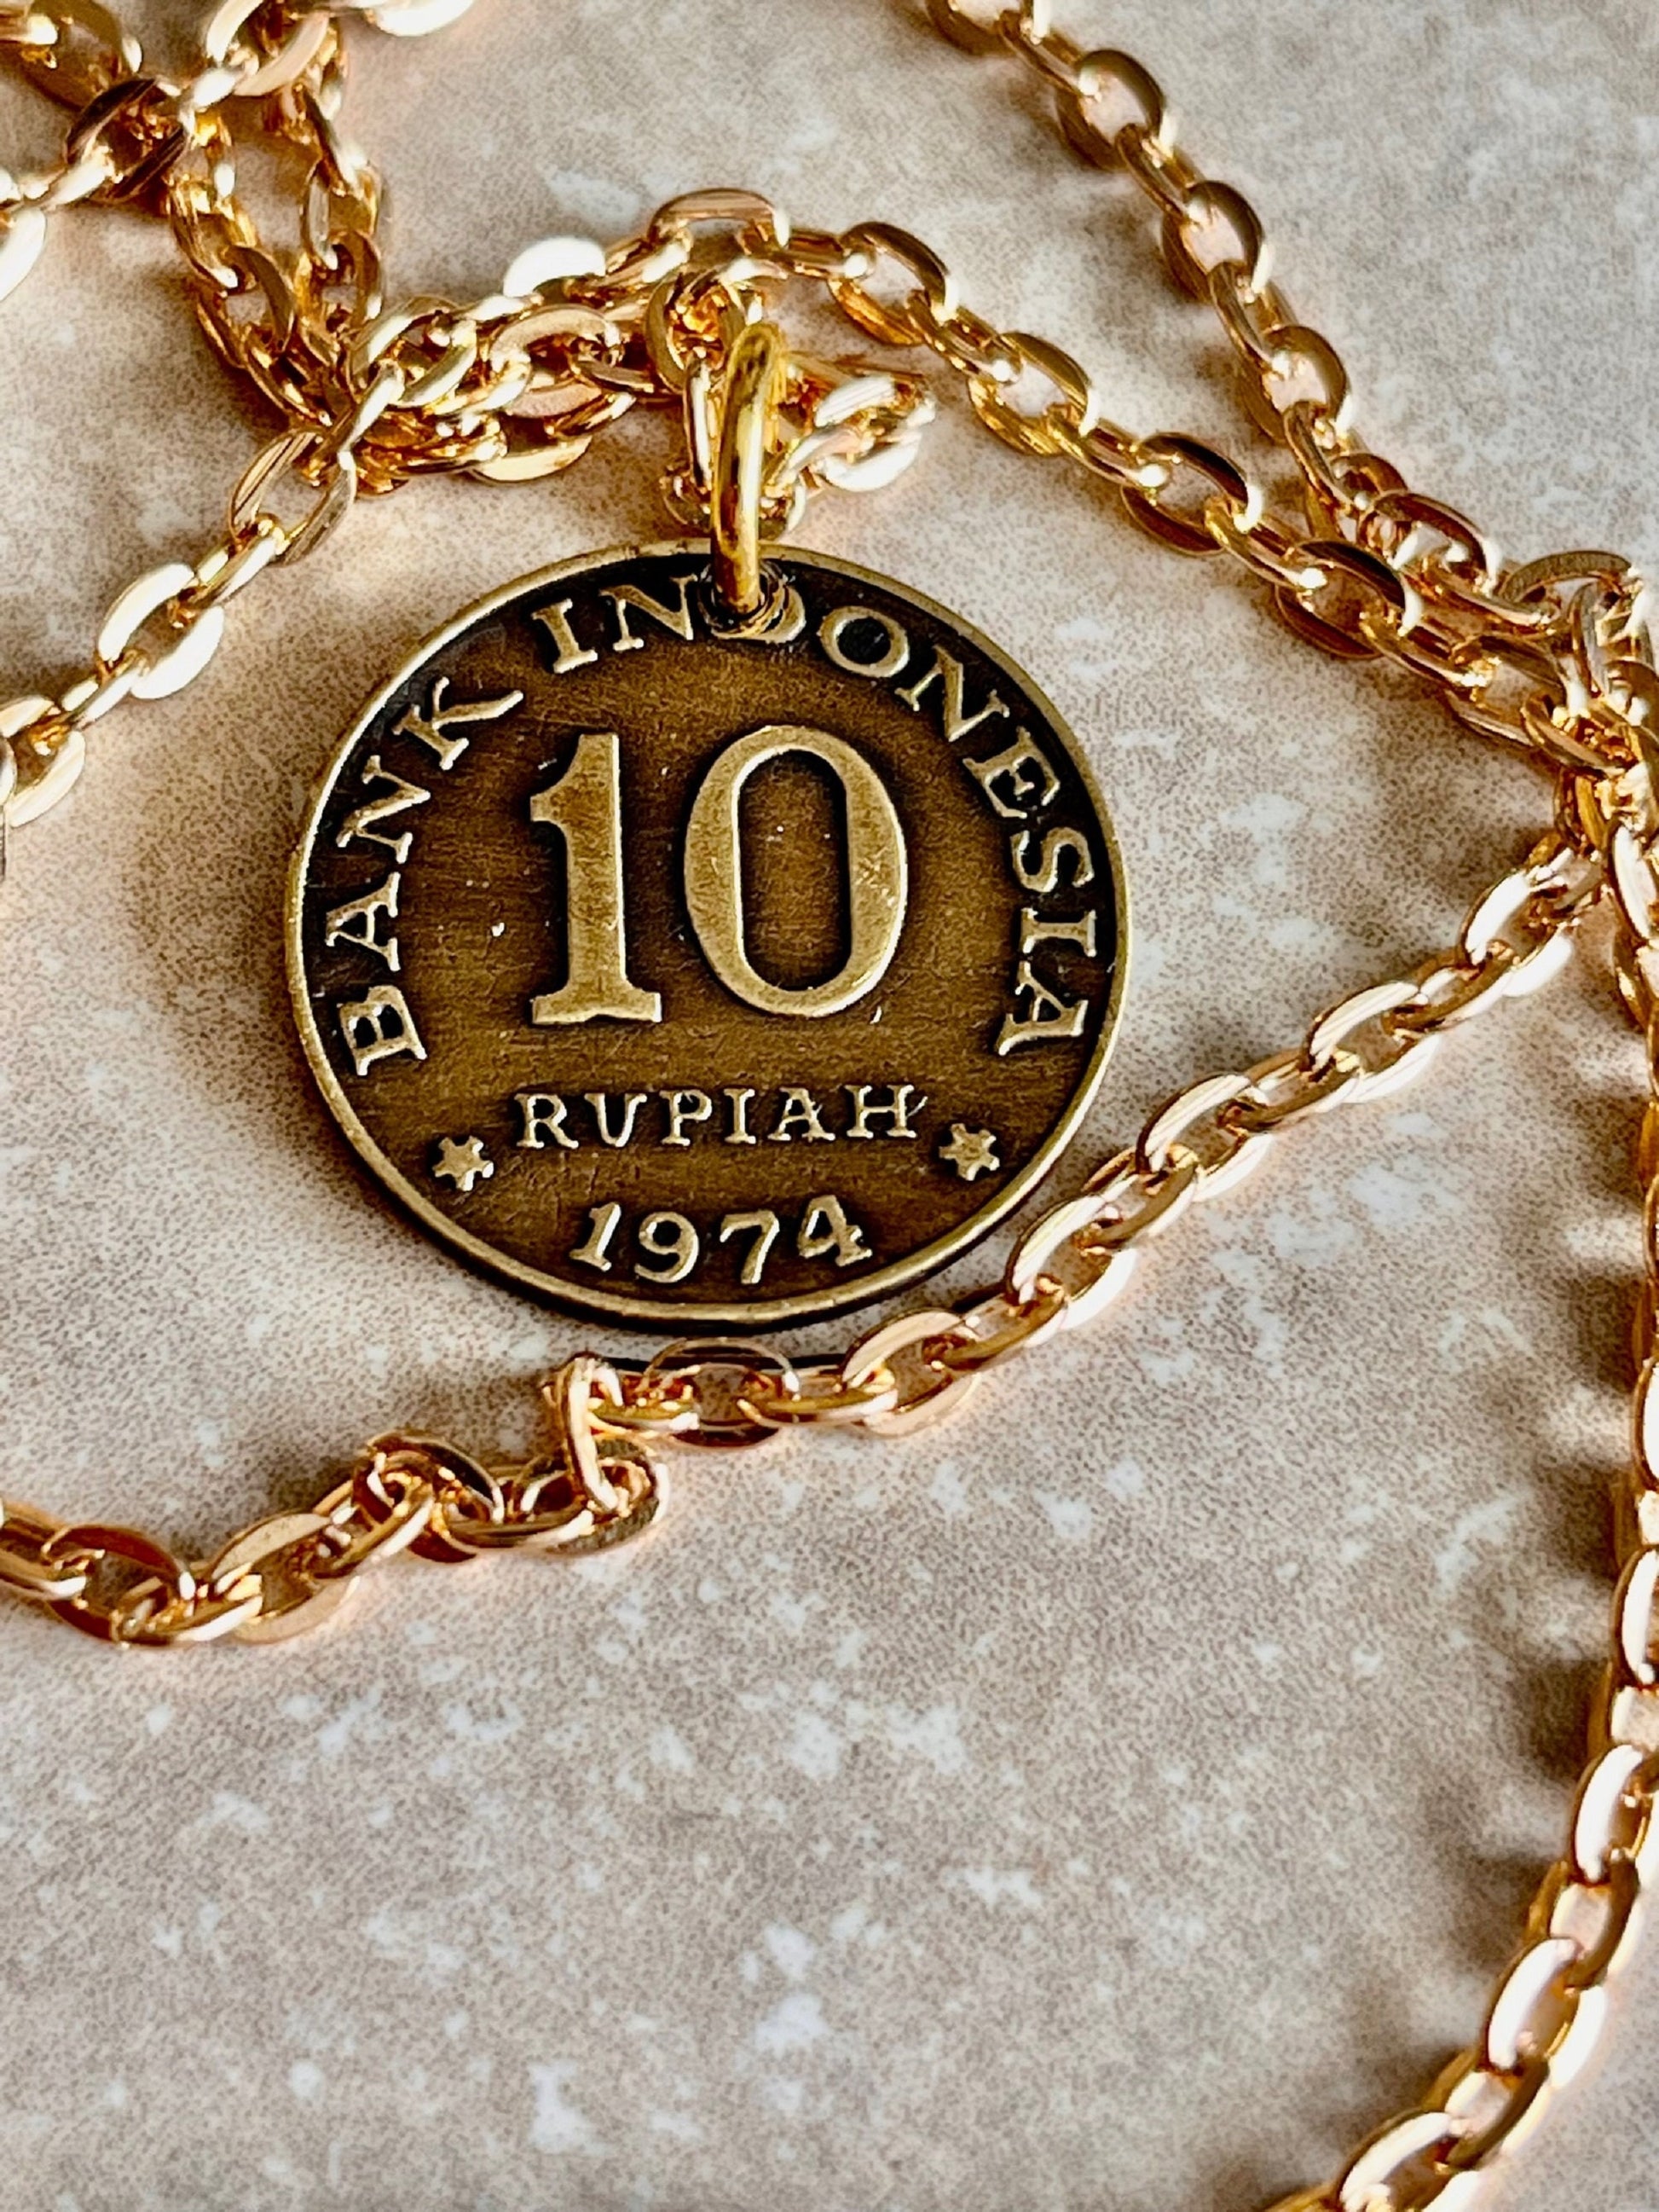 Indonesia Coin 10 Rupiah Necklace Coin Jewelry Pendant Vintage Custom Made Rare coins - Coin Enthusiast Fashion Accessory